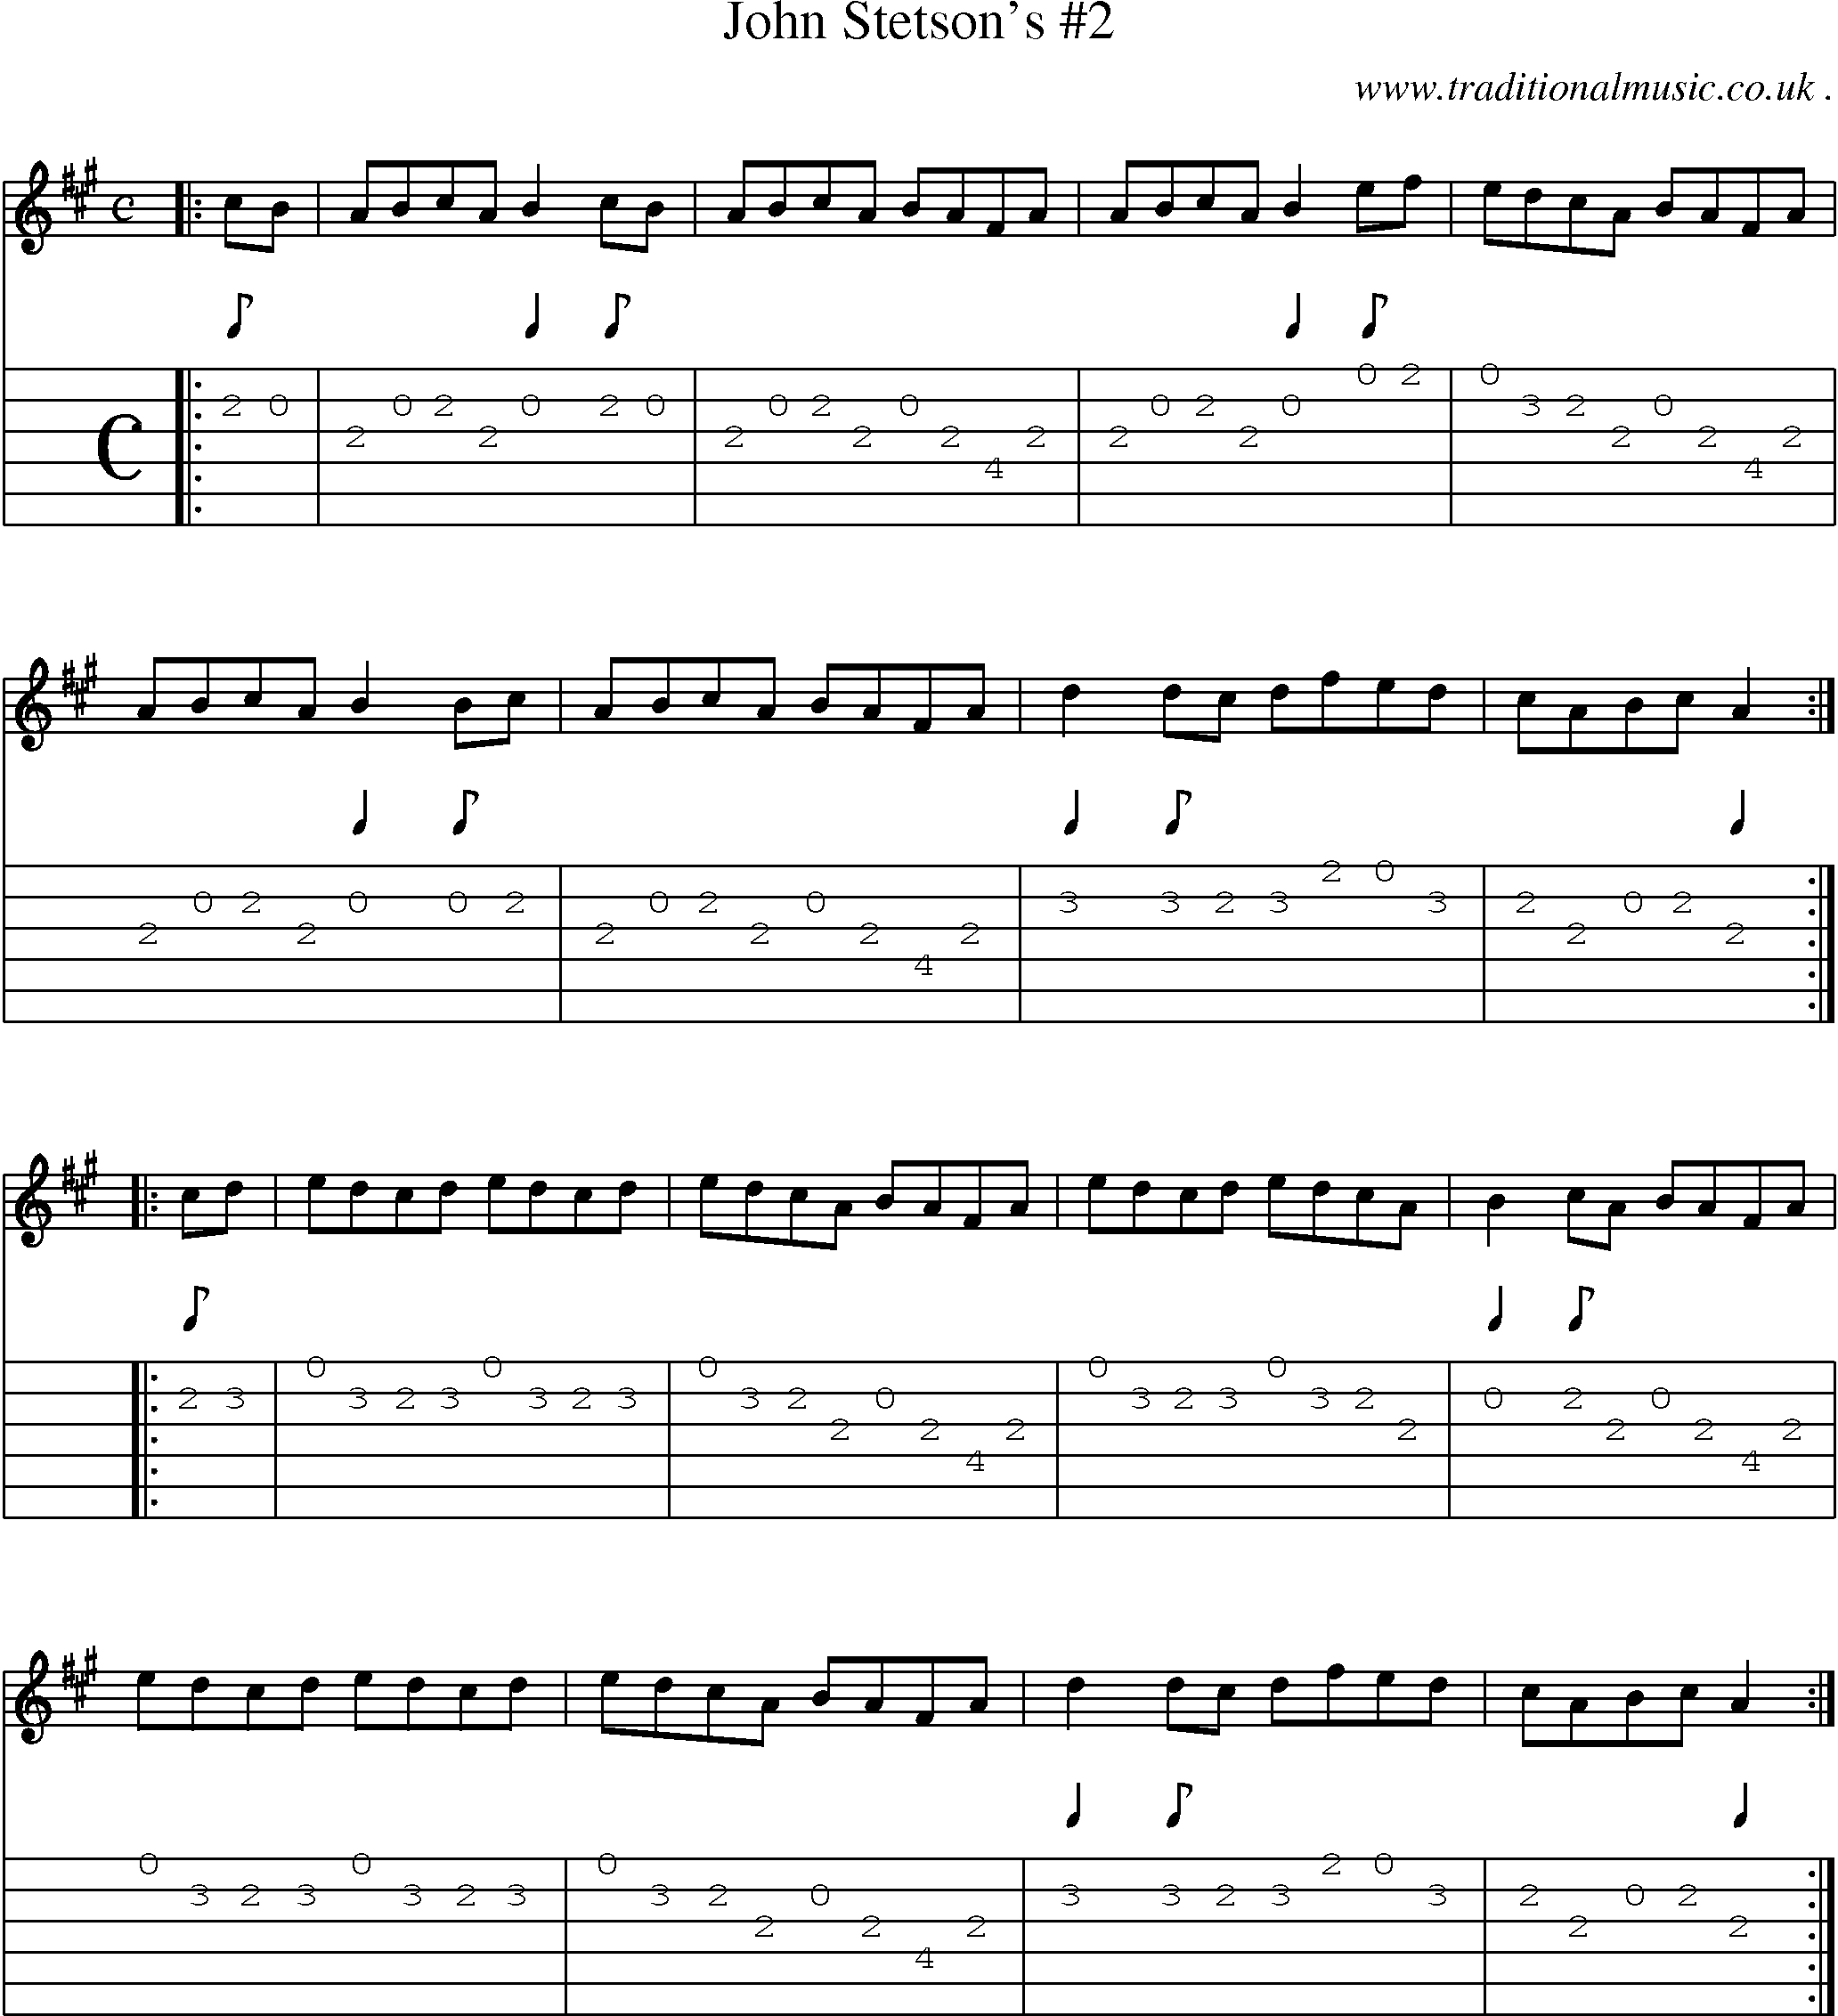 Sheet-Music and Guitar Tabs for John Stetsons 2